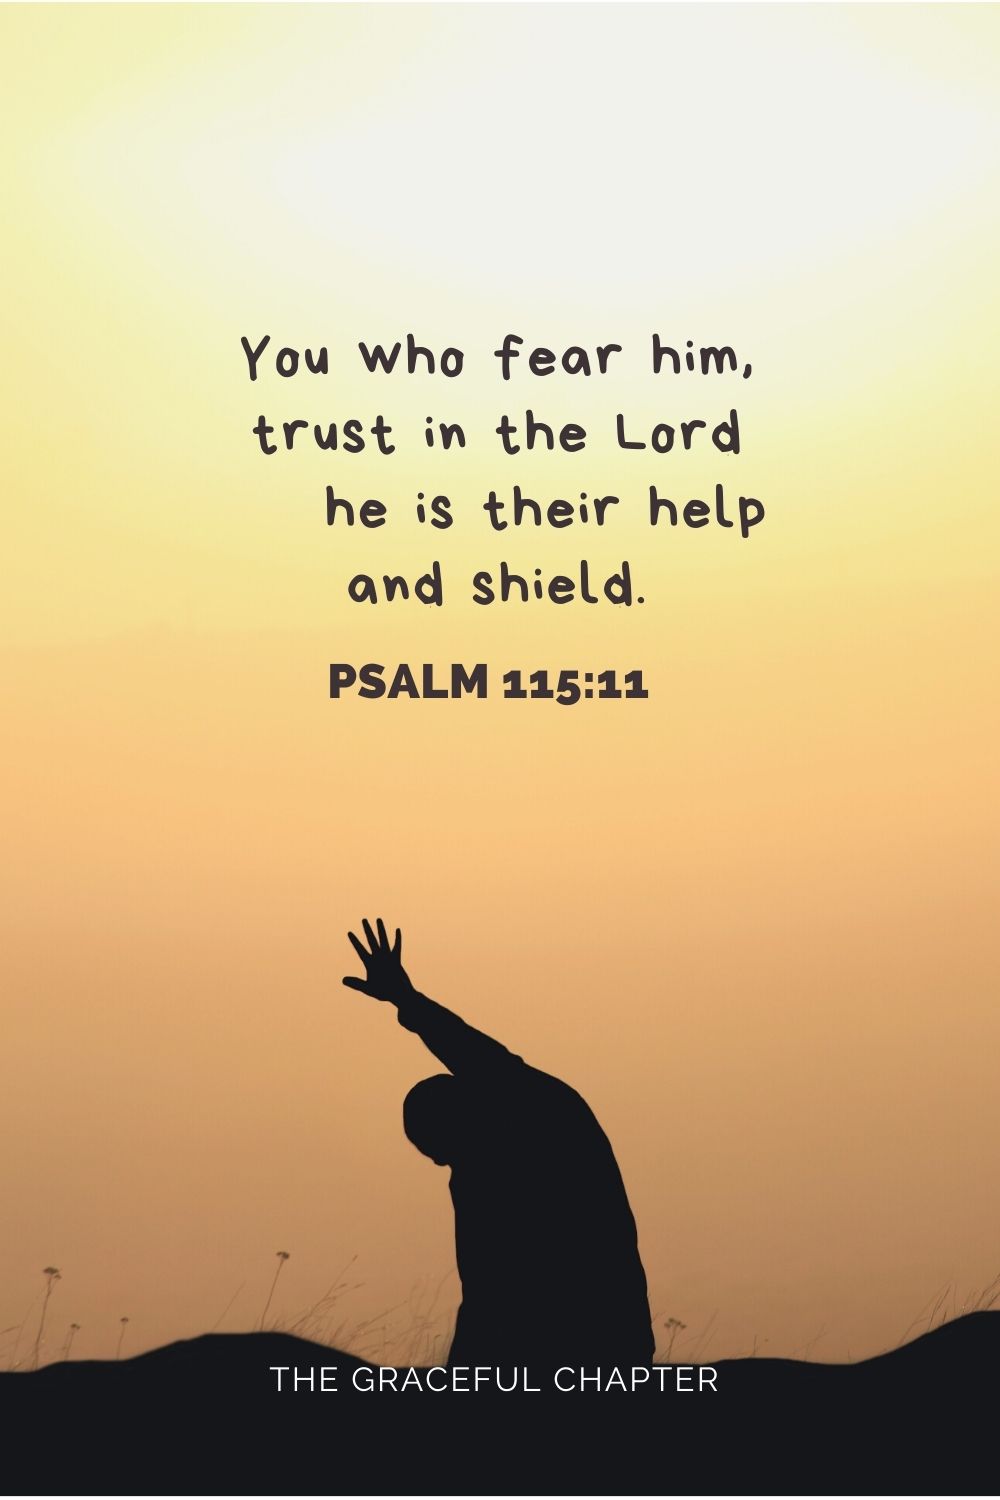 You who fear him, trust in the Lord he is their help and shield. Psalm 115:11